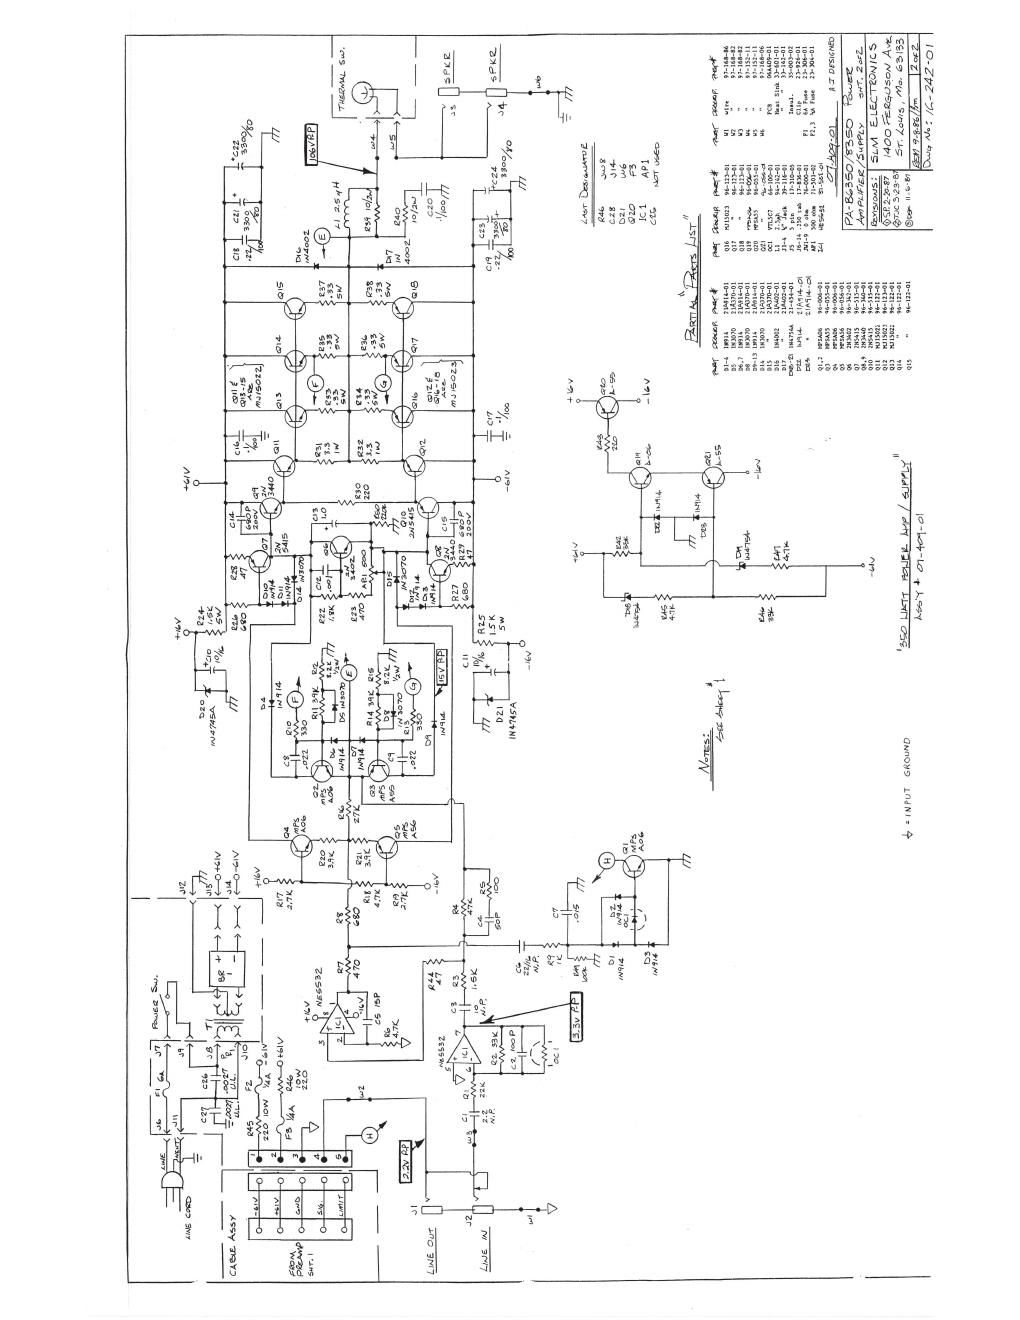 Crate PA B6350 8350 Power Amp Schematic